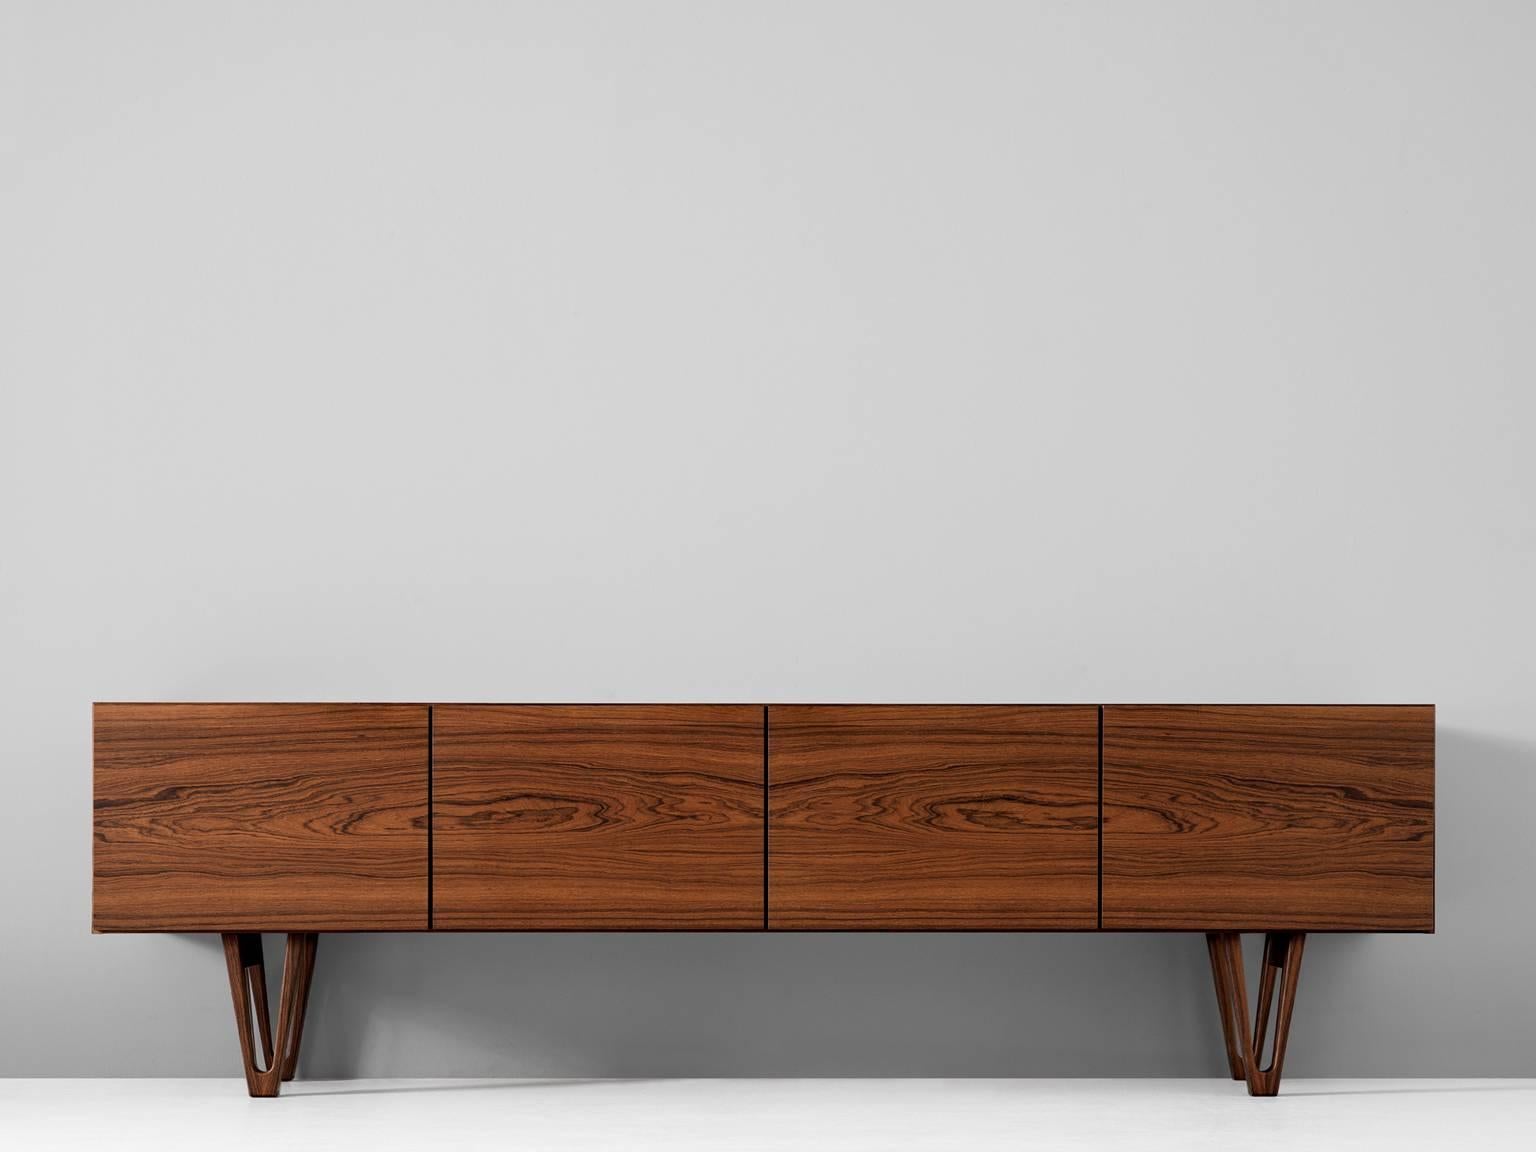 Sideboard in rosewood by Ib Kofod-Larsen for Säffle Möbelfabrik, Sweden, 1958.

Rare rosewood sideboard designed by de Danish designer Ib Kofod-Larsen. This low credenza was produced by the Swedish manufacturer Säffle Möbelfabrik. This model